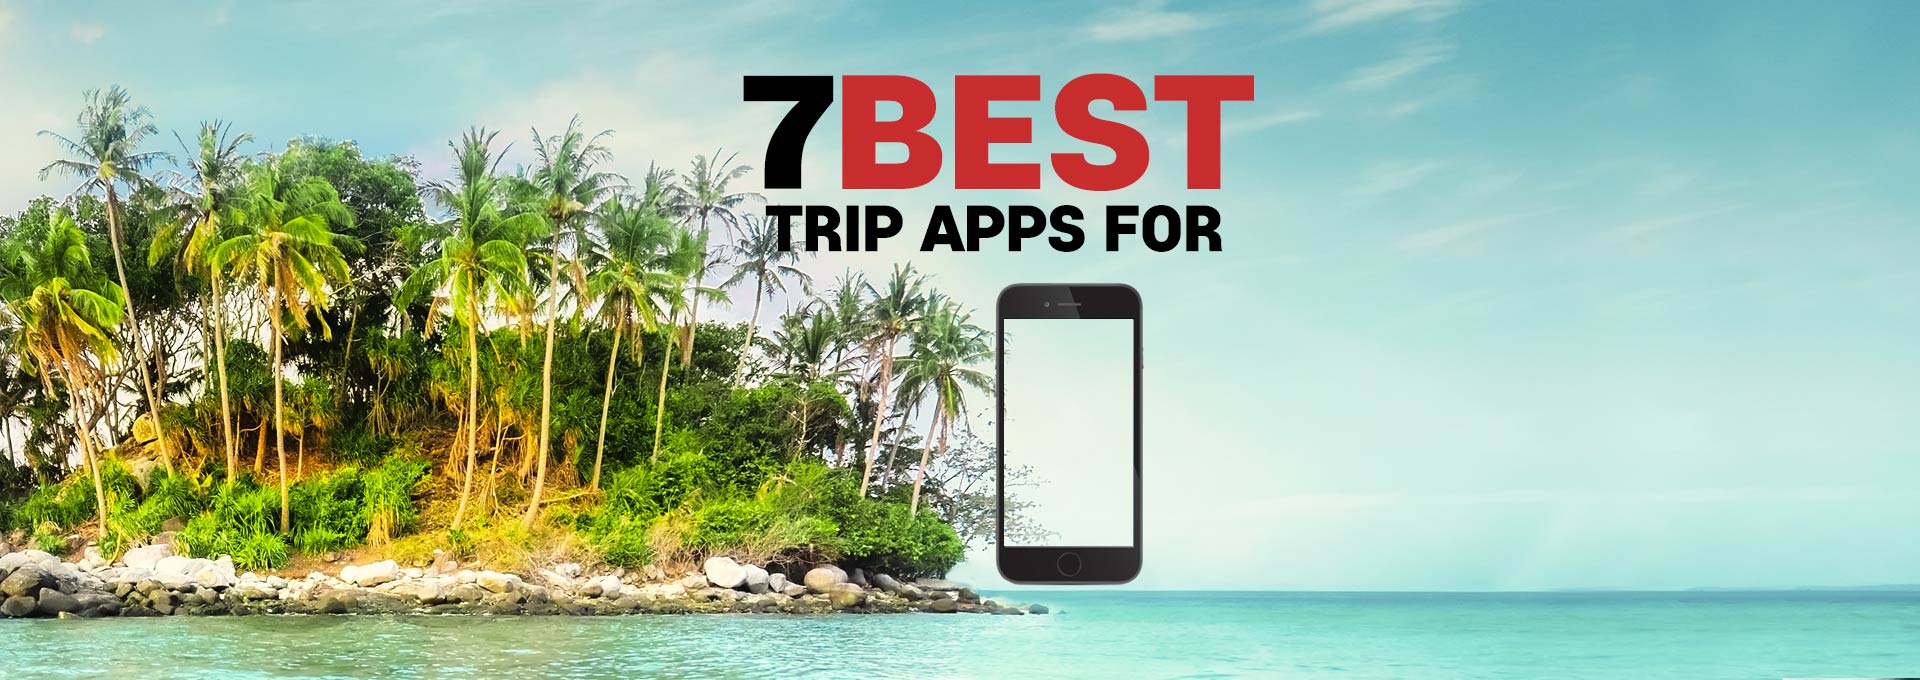 Check out the 7 Best Trip Apps For Iphone